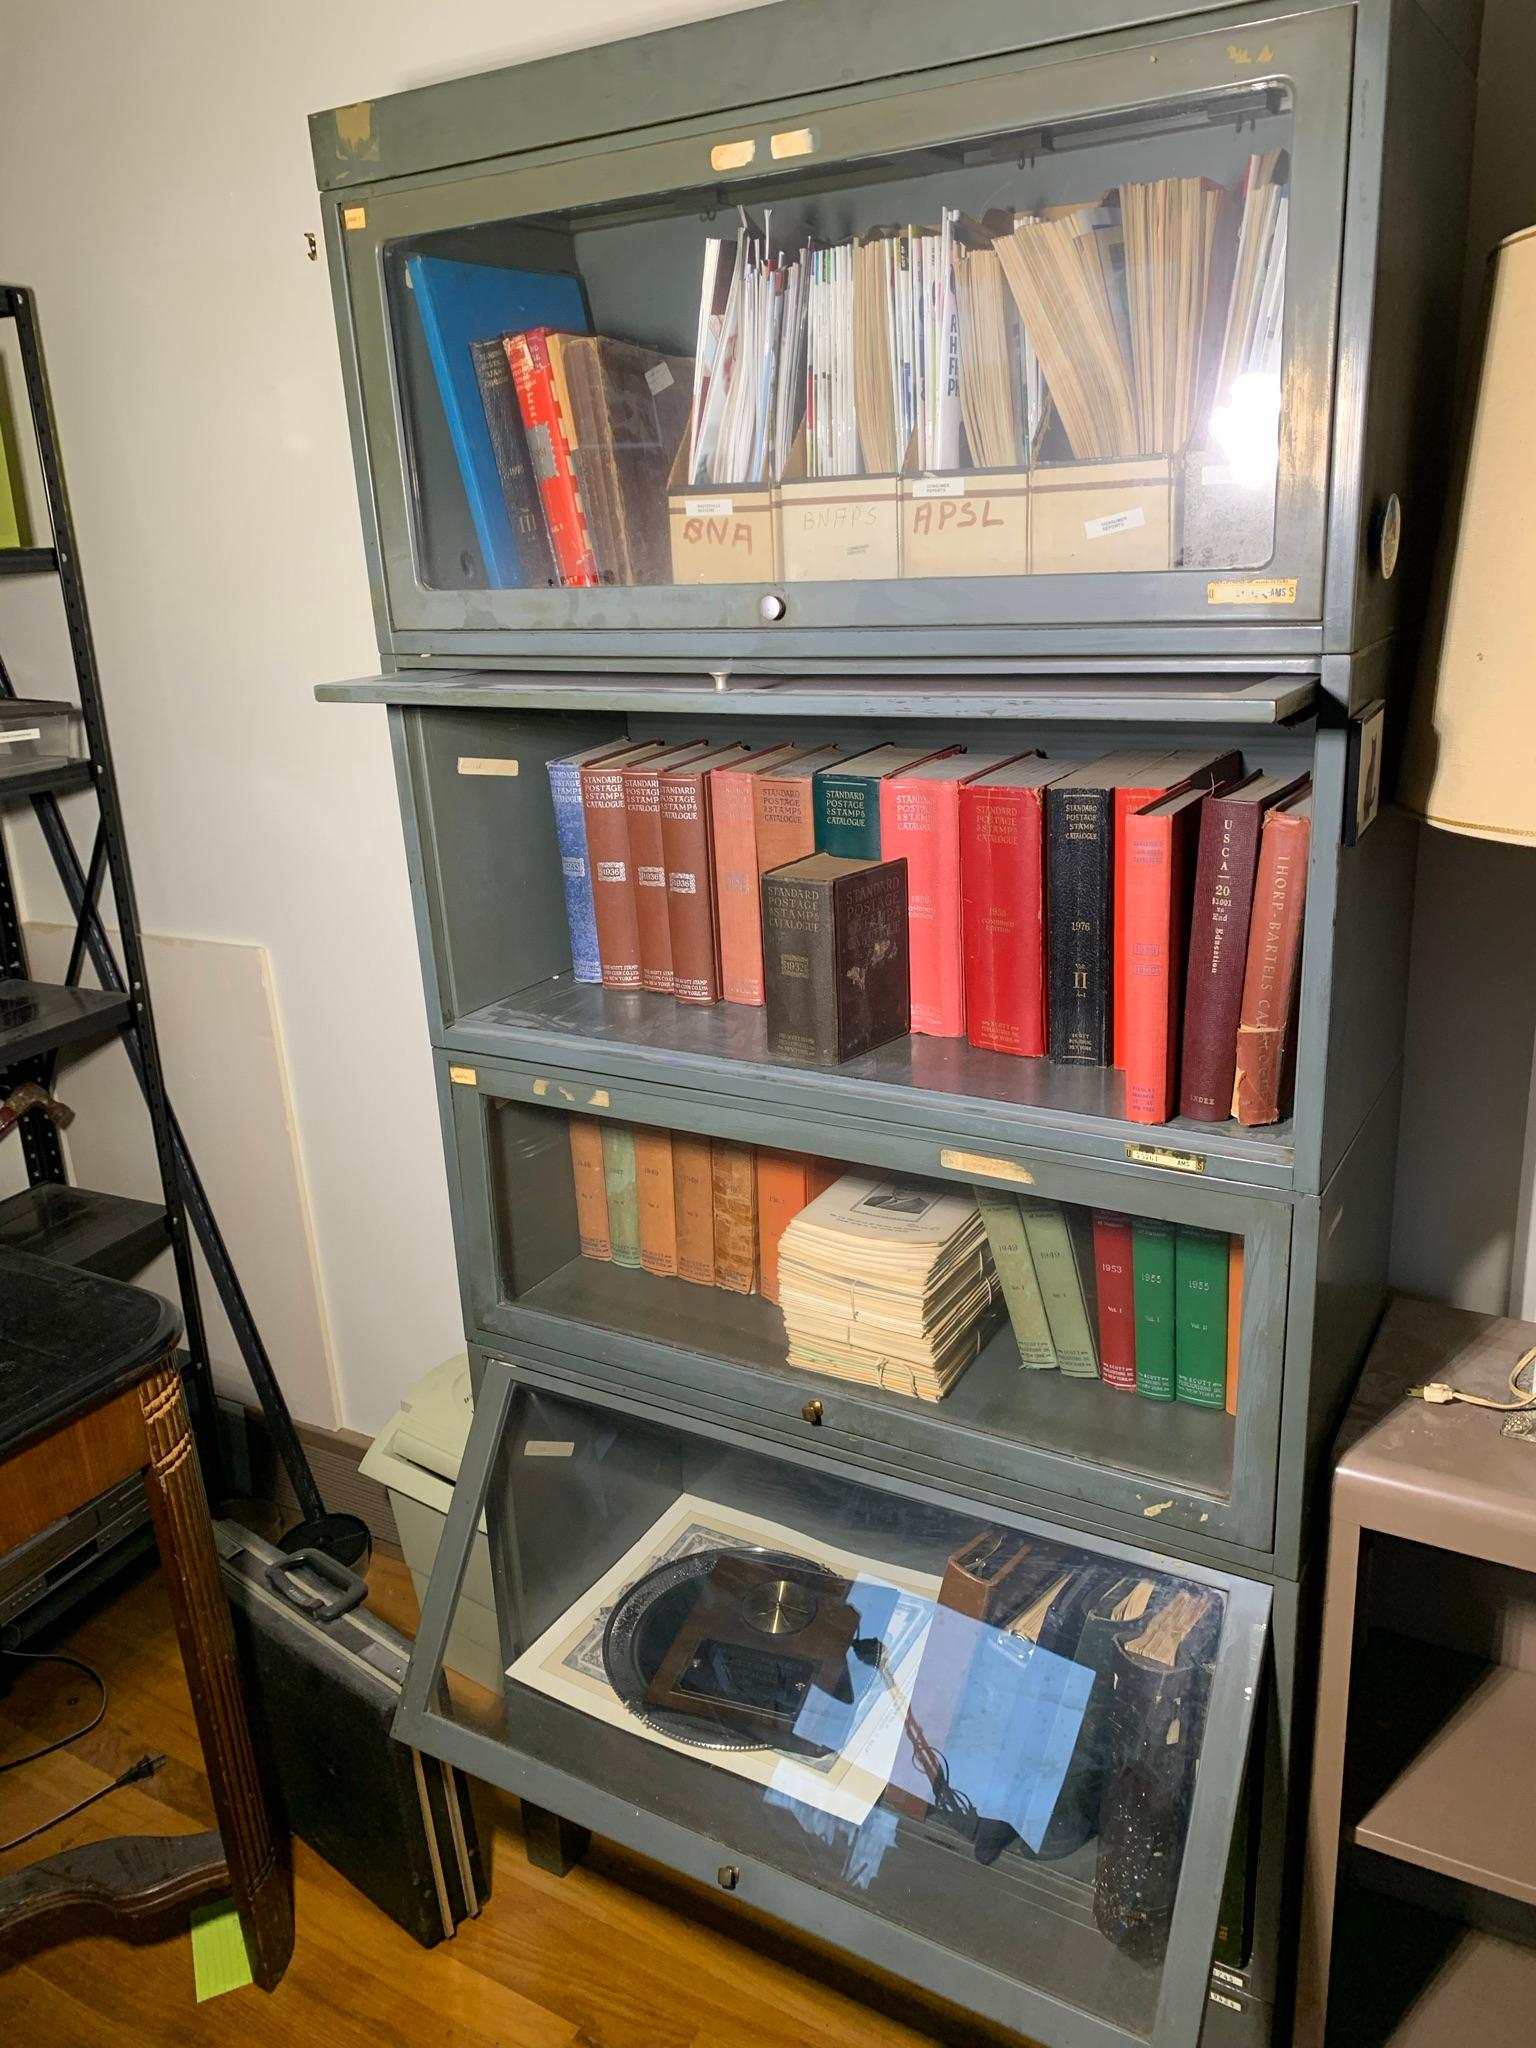 2 Hon Filing Cabinets,  Globe -Wernicke Stackable Shelving Unit, Assorted Books & Electronics